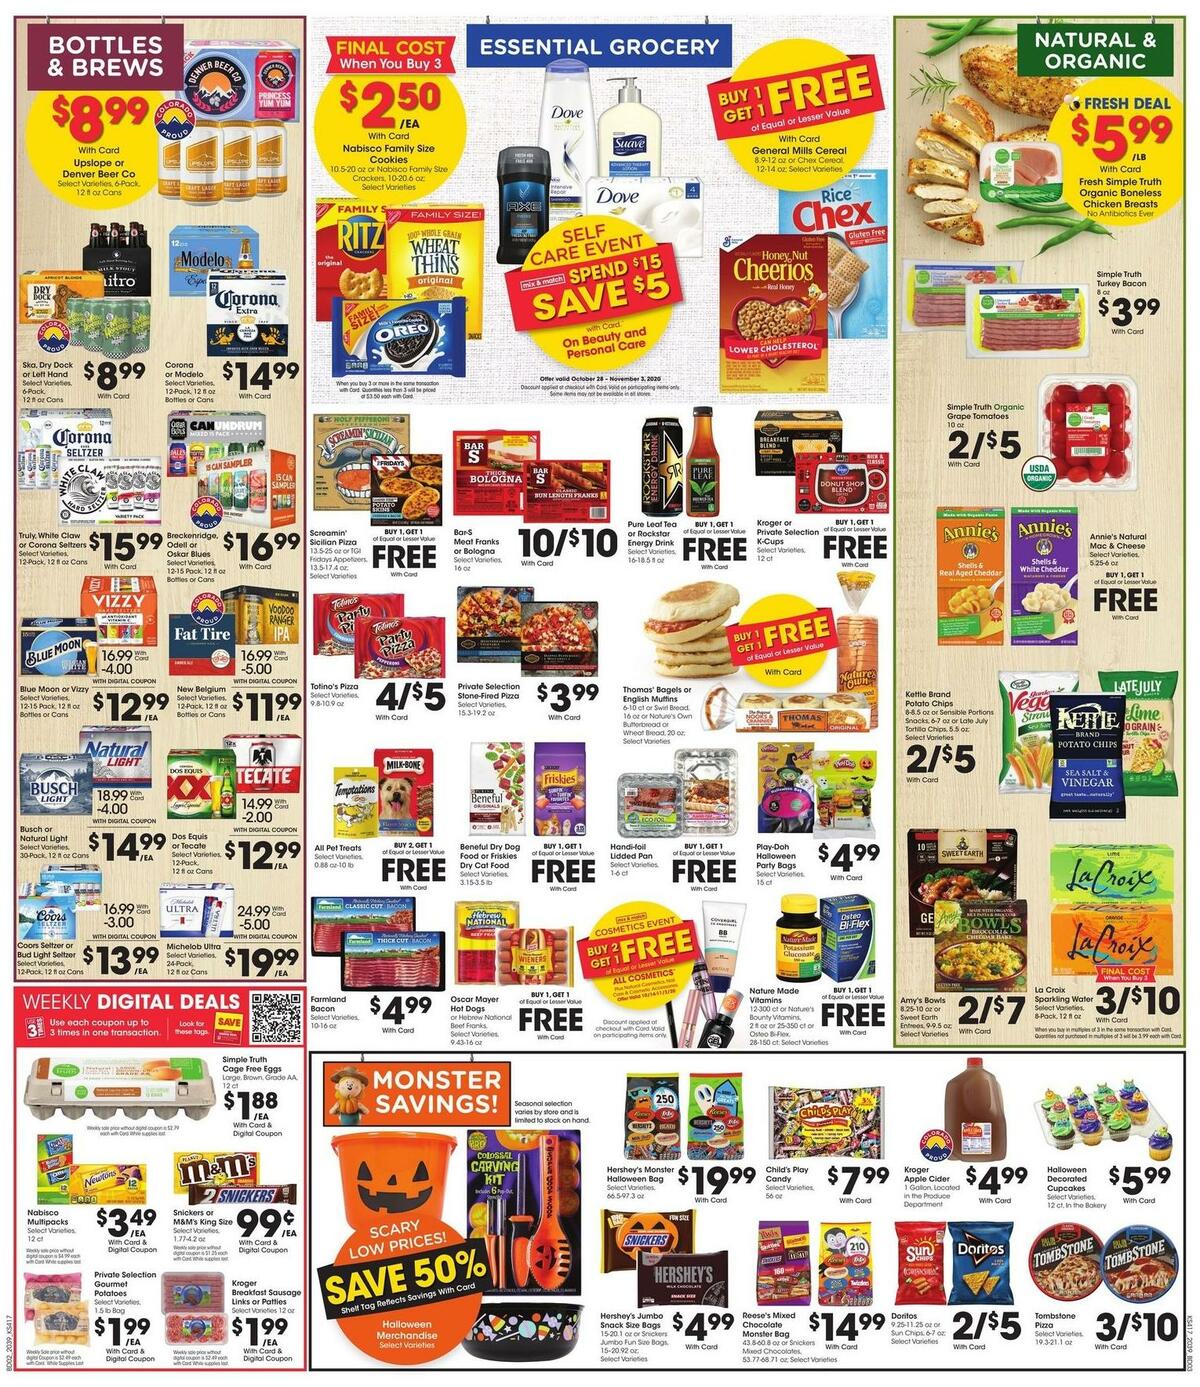 City Market Weekly Ad from October 28